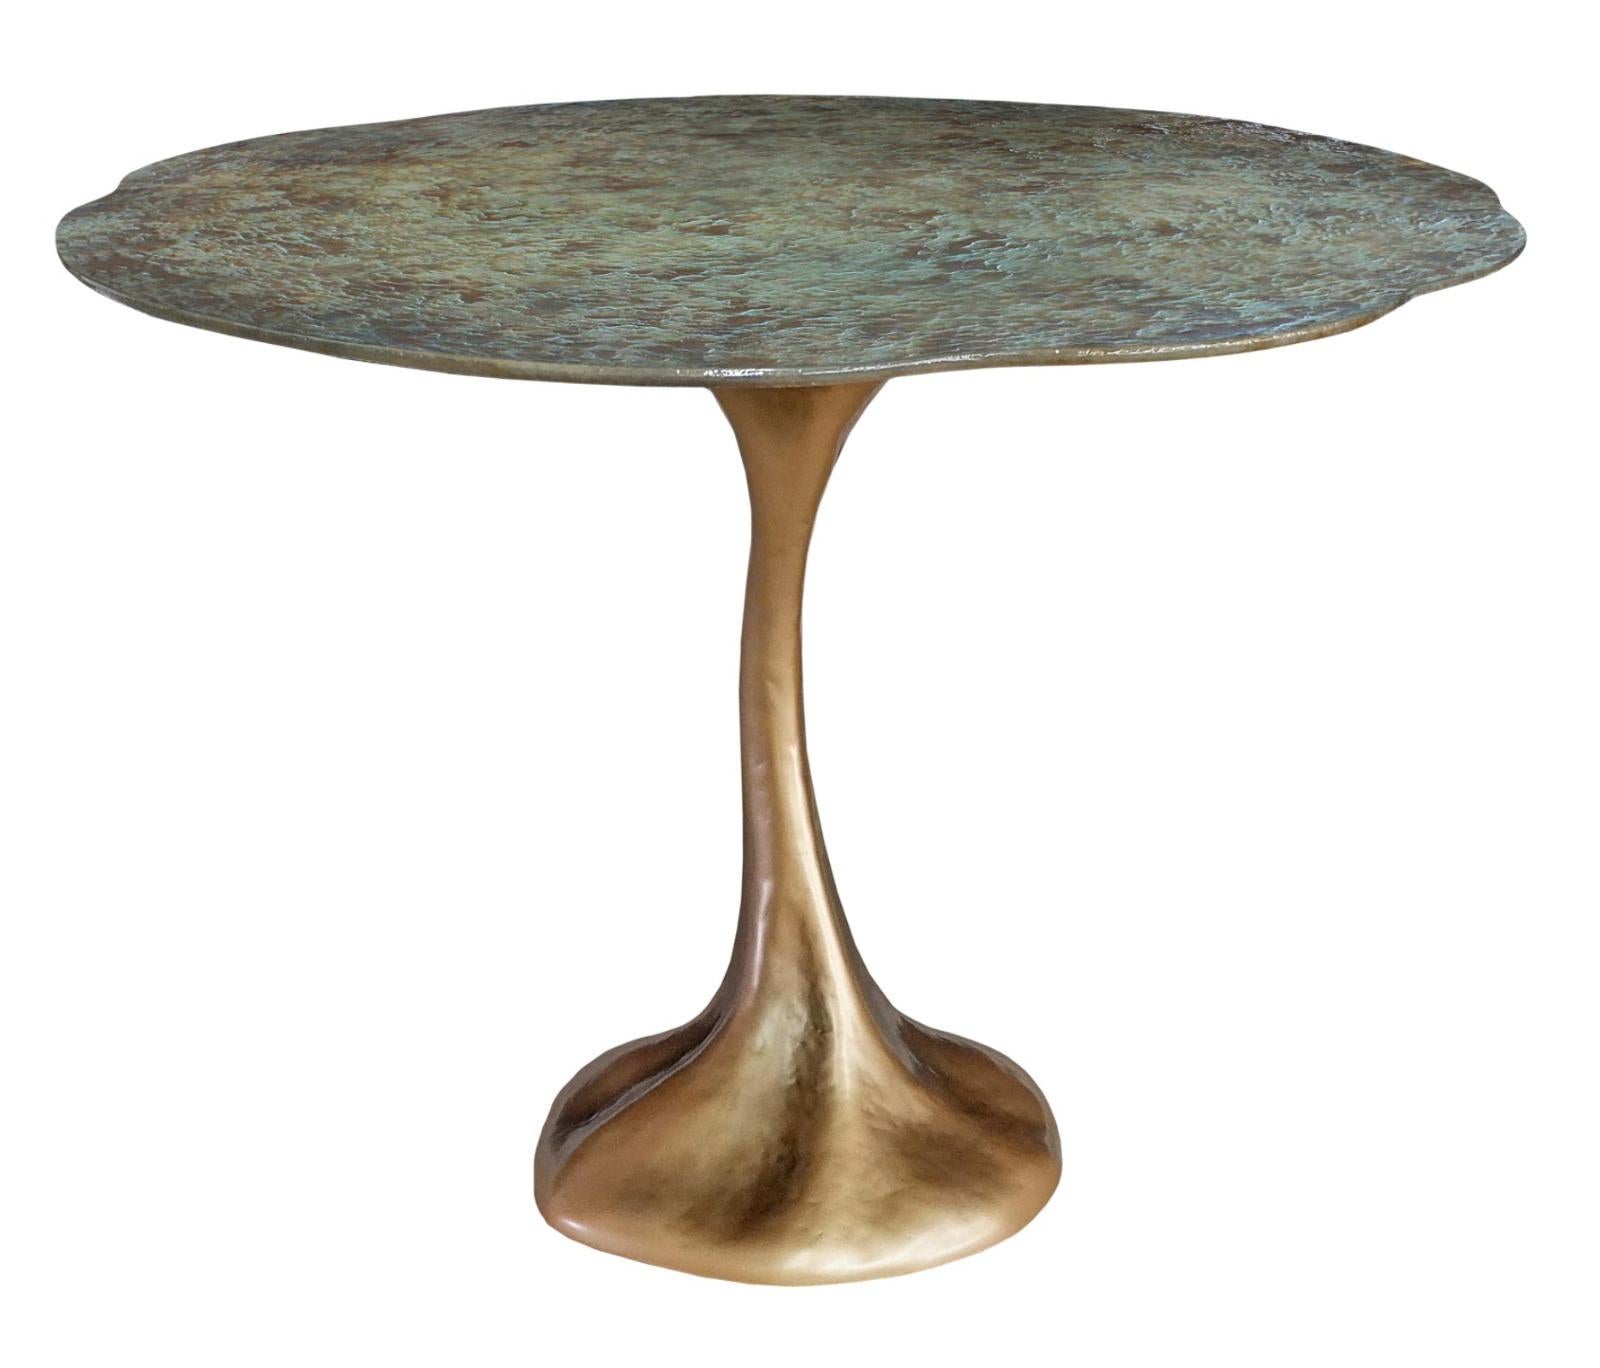 Dining table

General information
Dimensions (cm): Ø100 x 75
Dimensions (in): Ø39.4 x 29.5
Weight (kg): 30
Weight (lbs): 66.1
Seats: 4

Materials and colors
Top: Resin reinforced with fiberglass in ceramic finish;
Base: Resin reinforced with